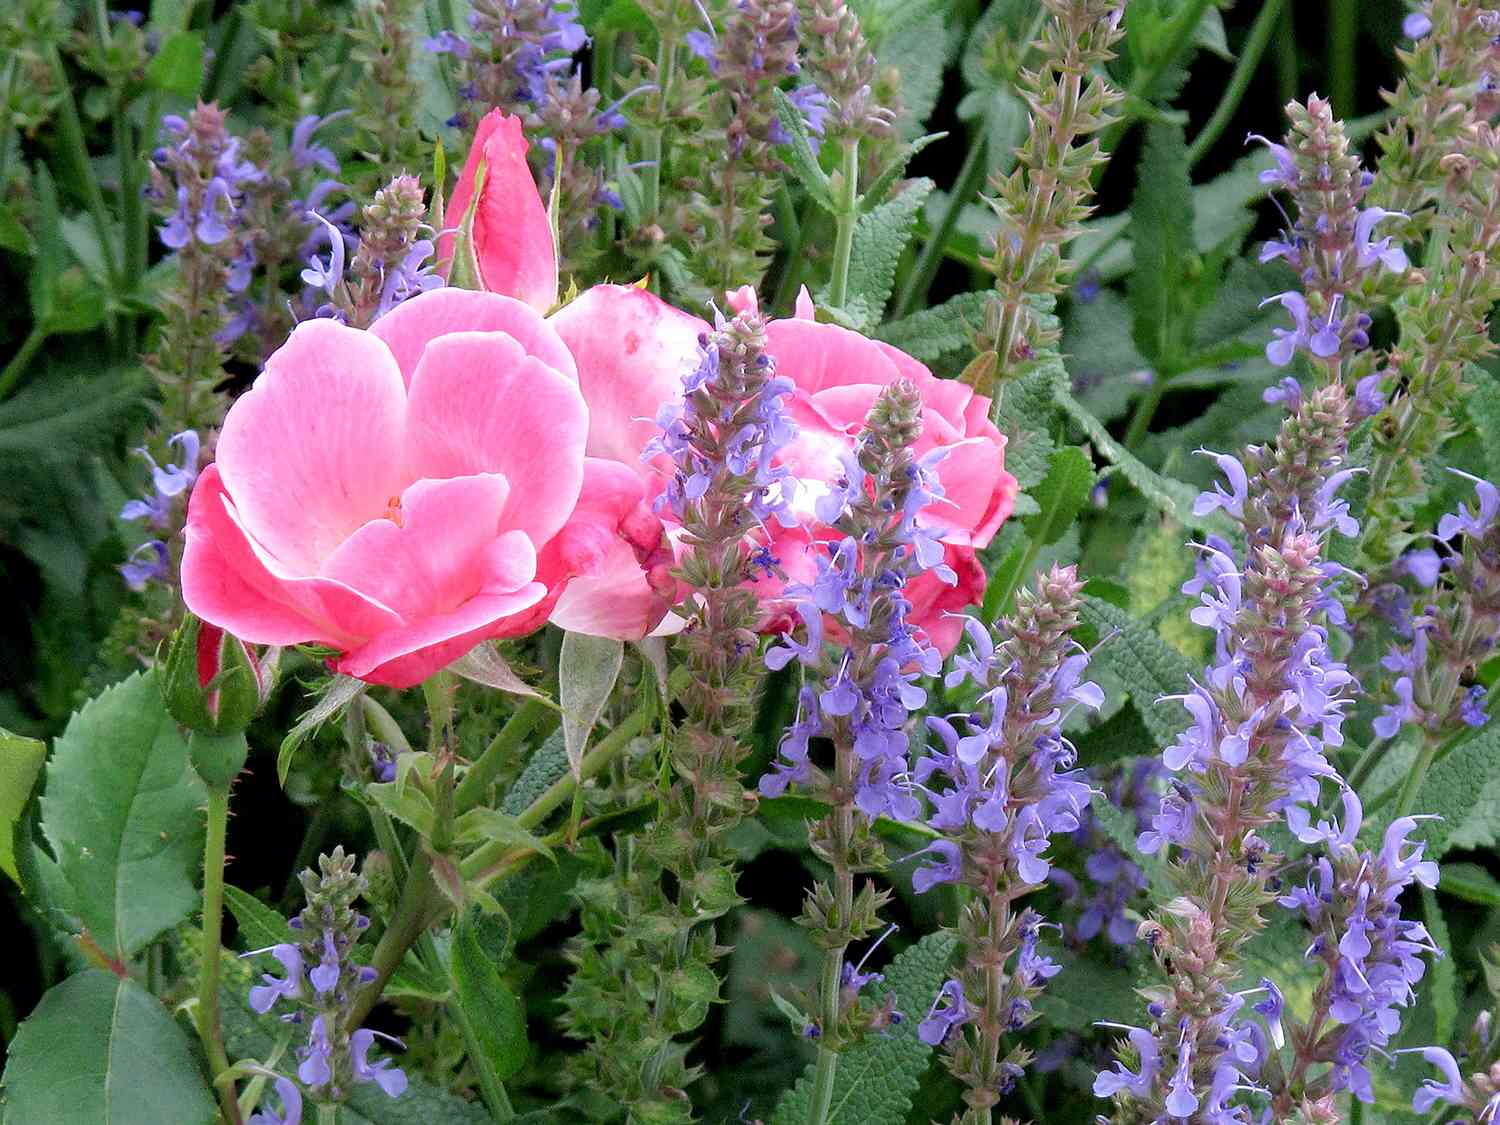 Pink knockout rose and blue salvia plant